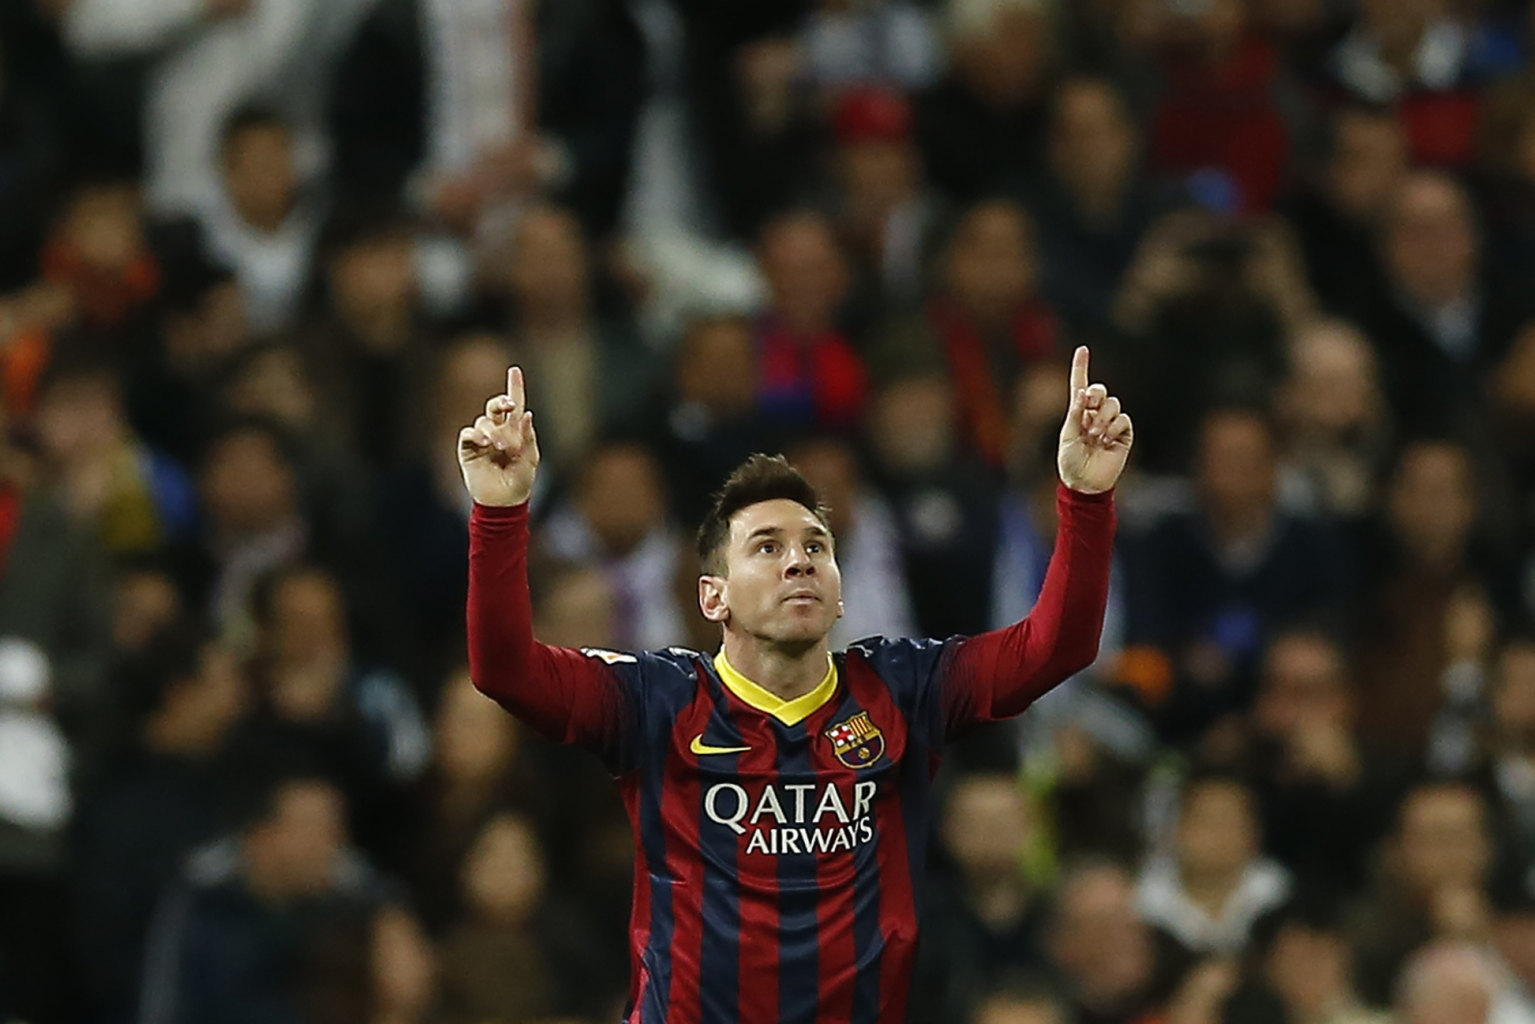 Lionel Messi raising his two fingers to the sky in Real Madrid vs Barça